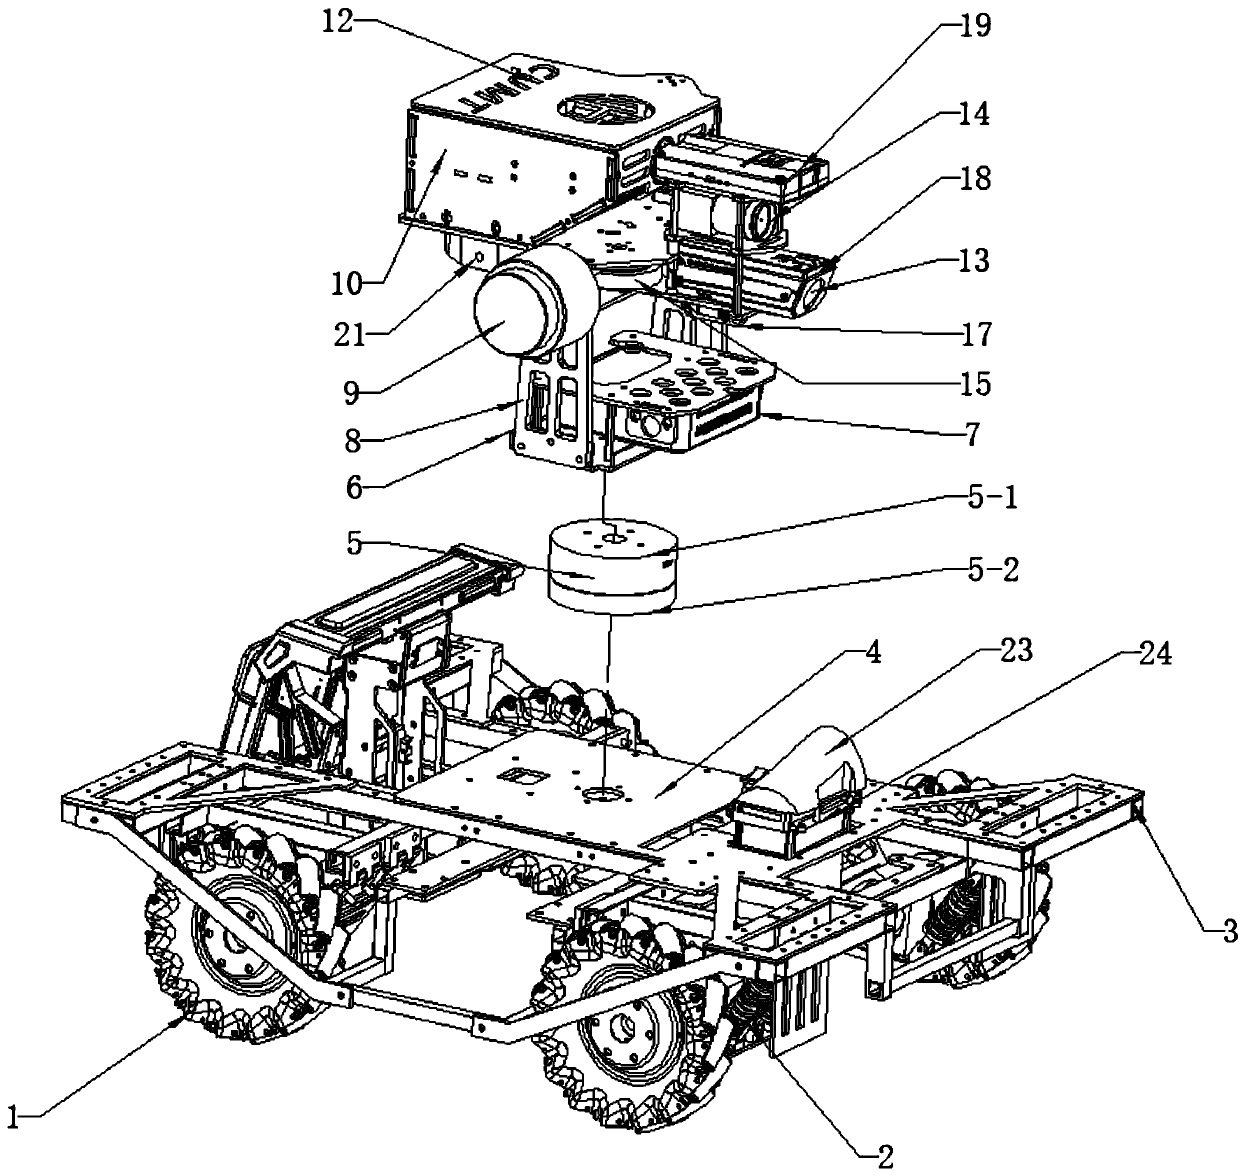 Mobile shooting robot with cradle head and chassis capable of rotating 360 degrees